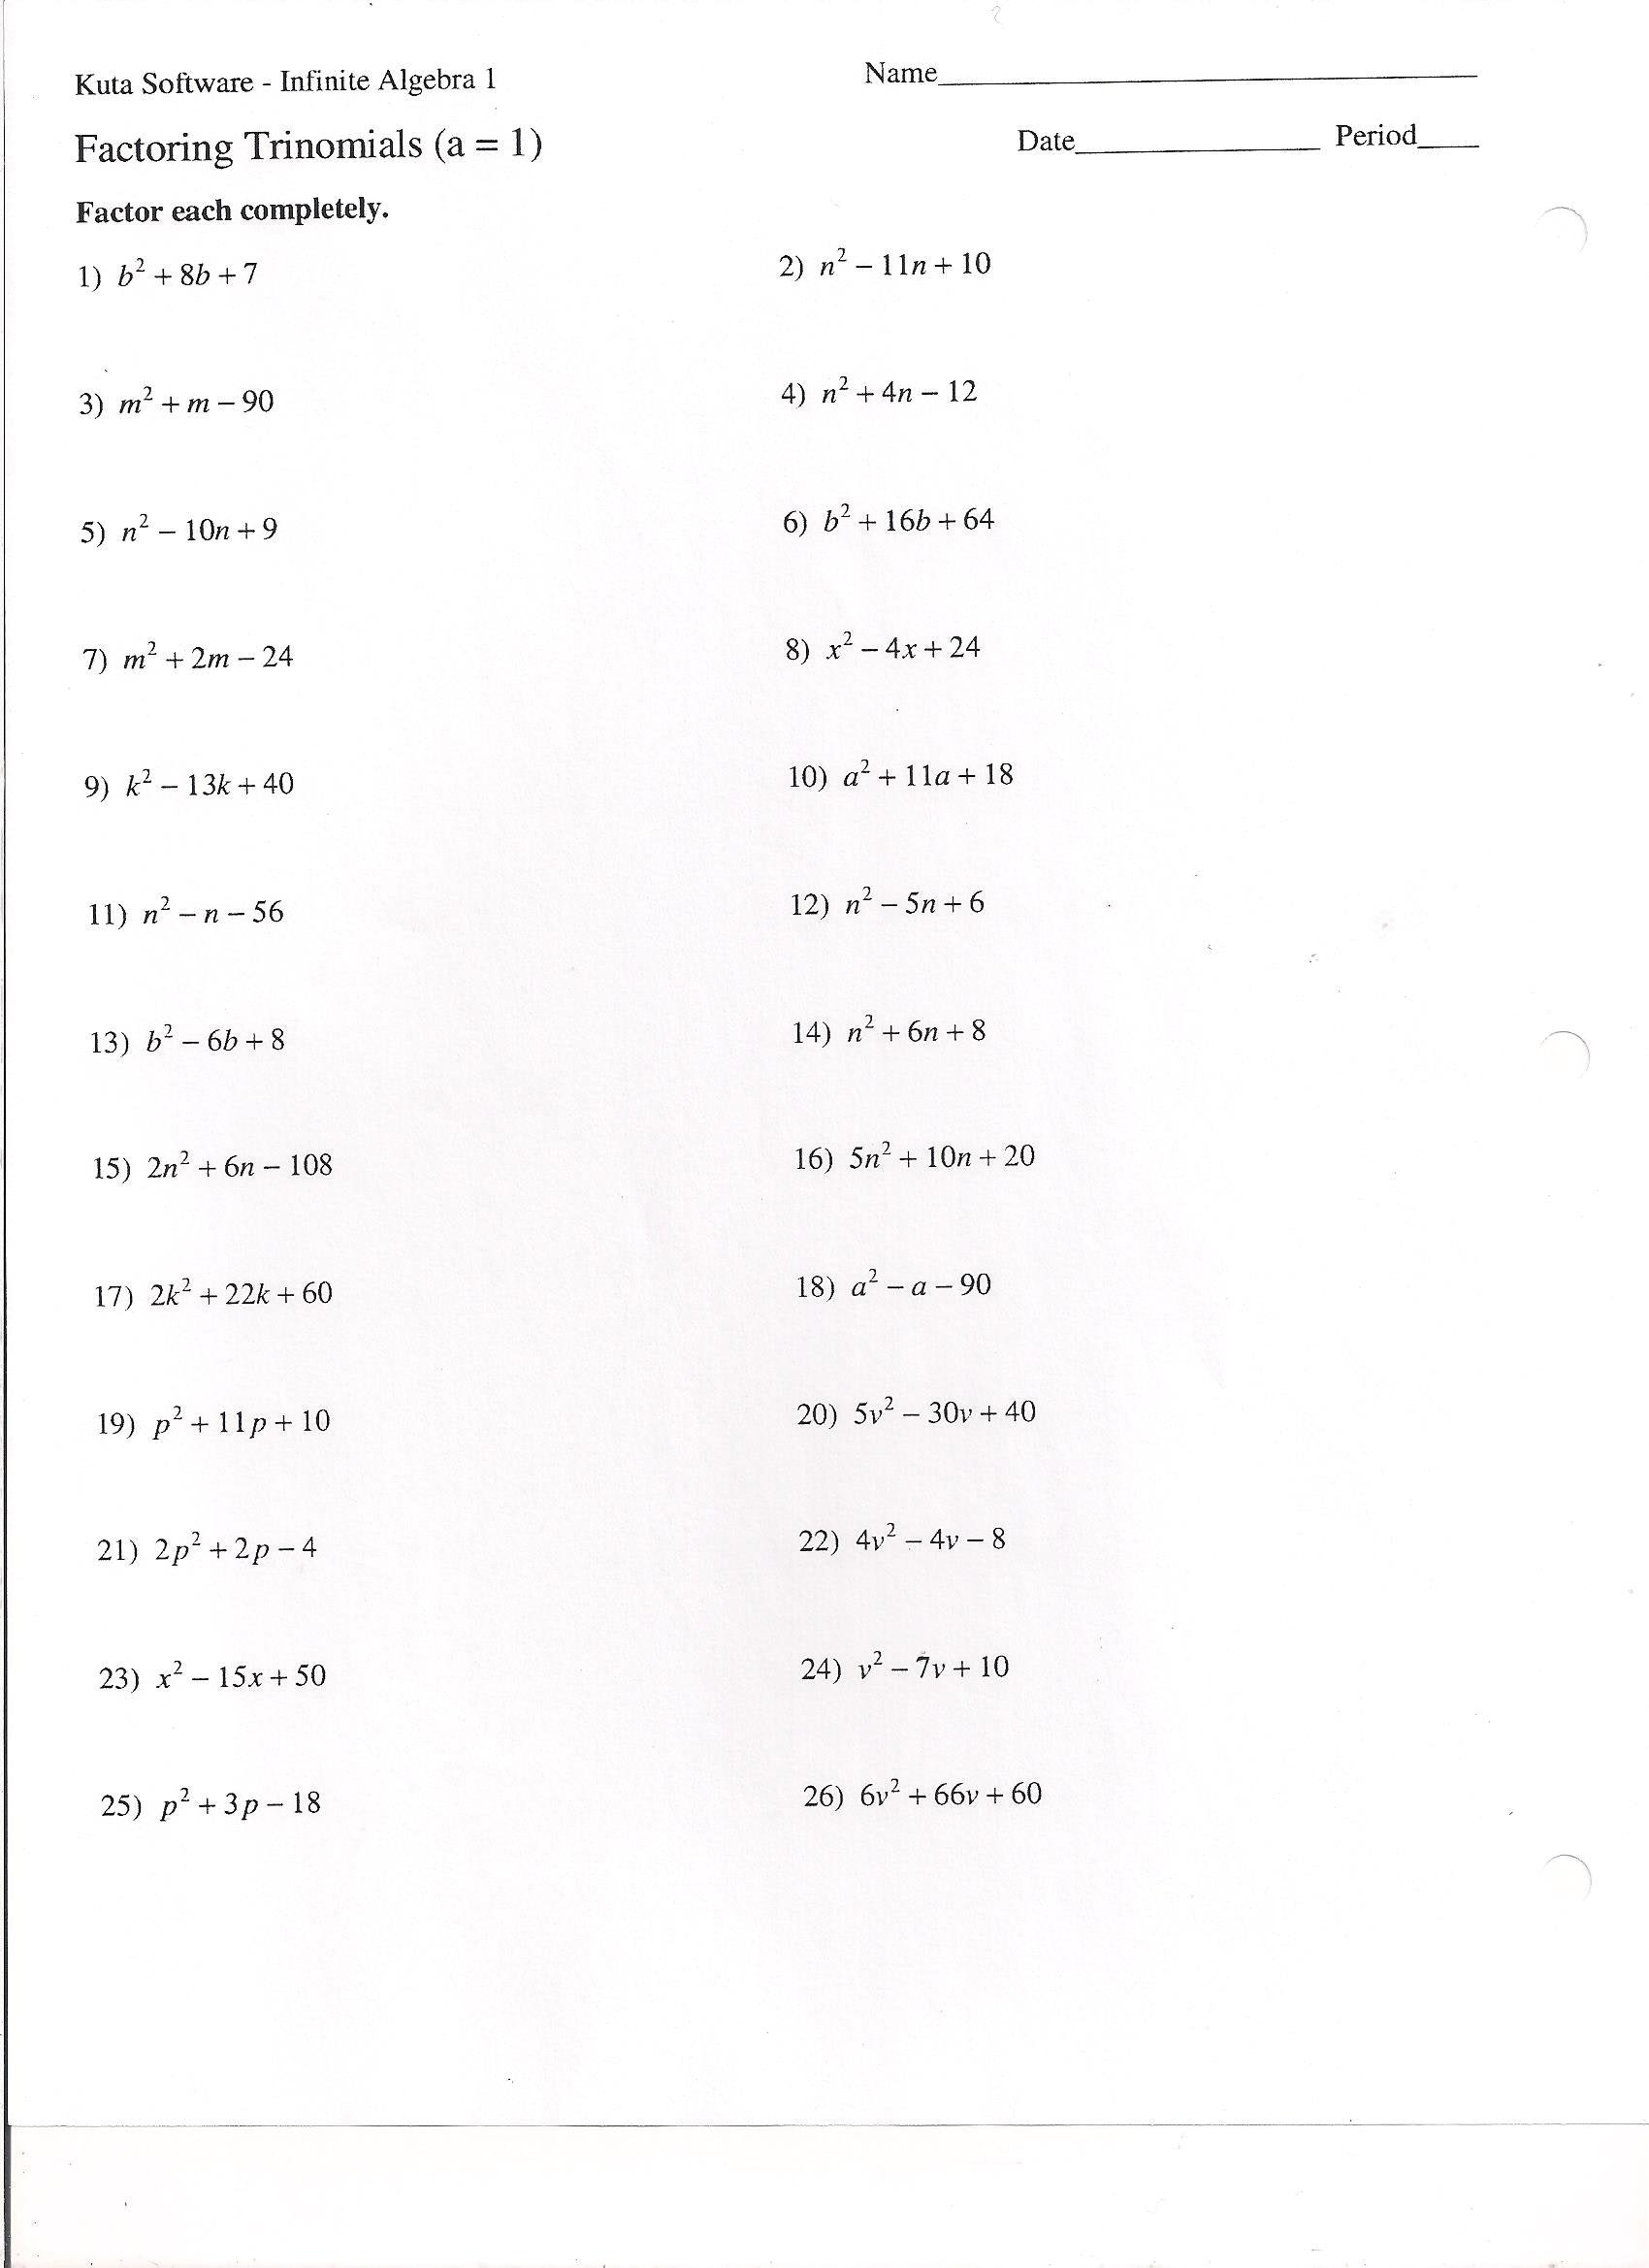 Worksheet Factoring Perfect Sq Factoring Perfect Square Trinomials In Worksheet Factoring Trinomials Answers